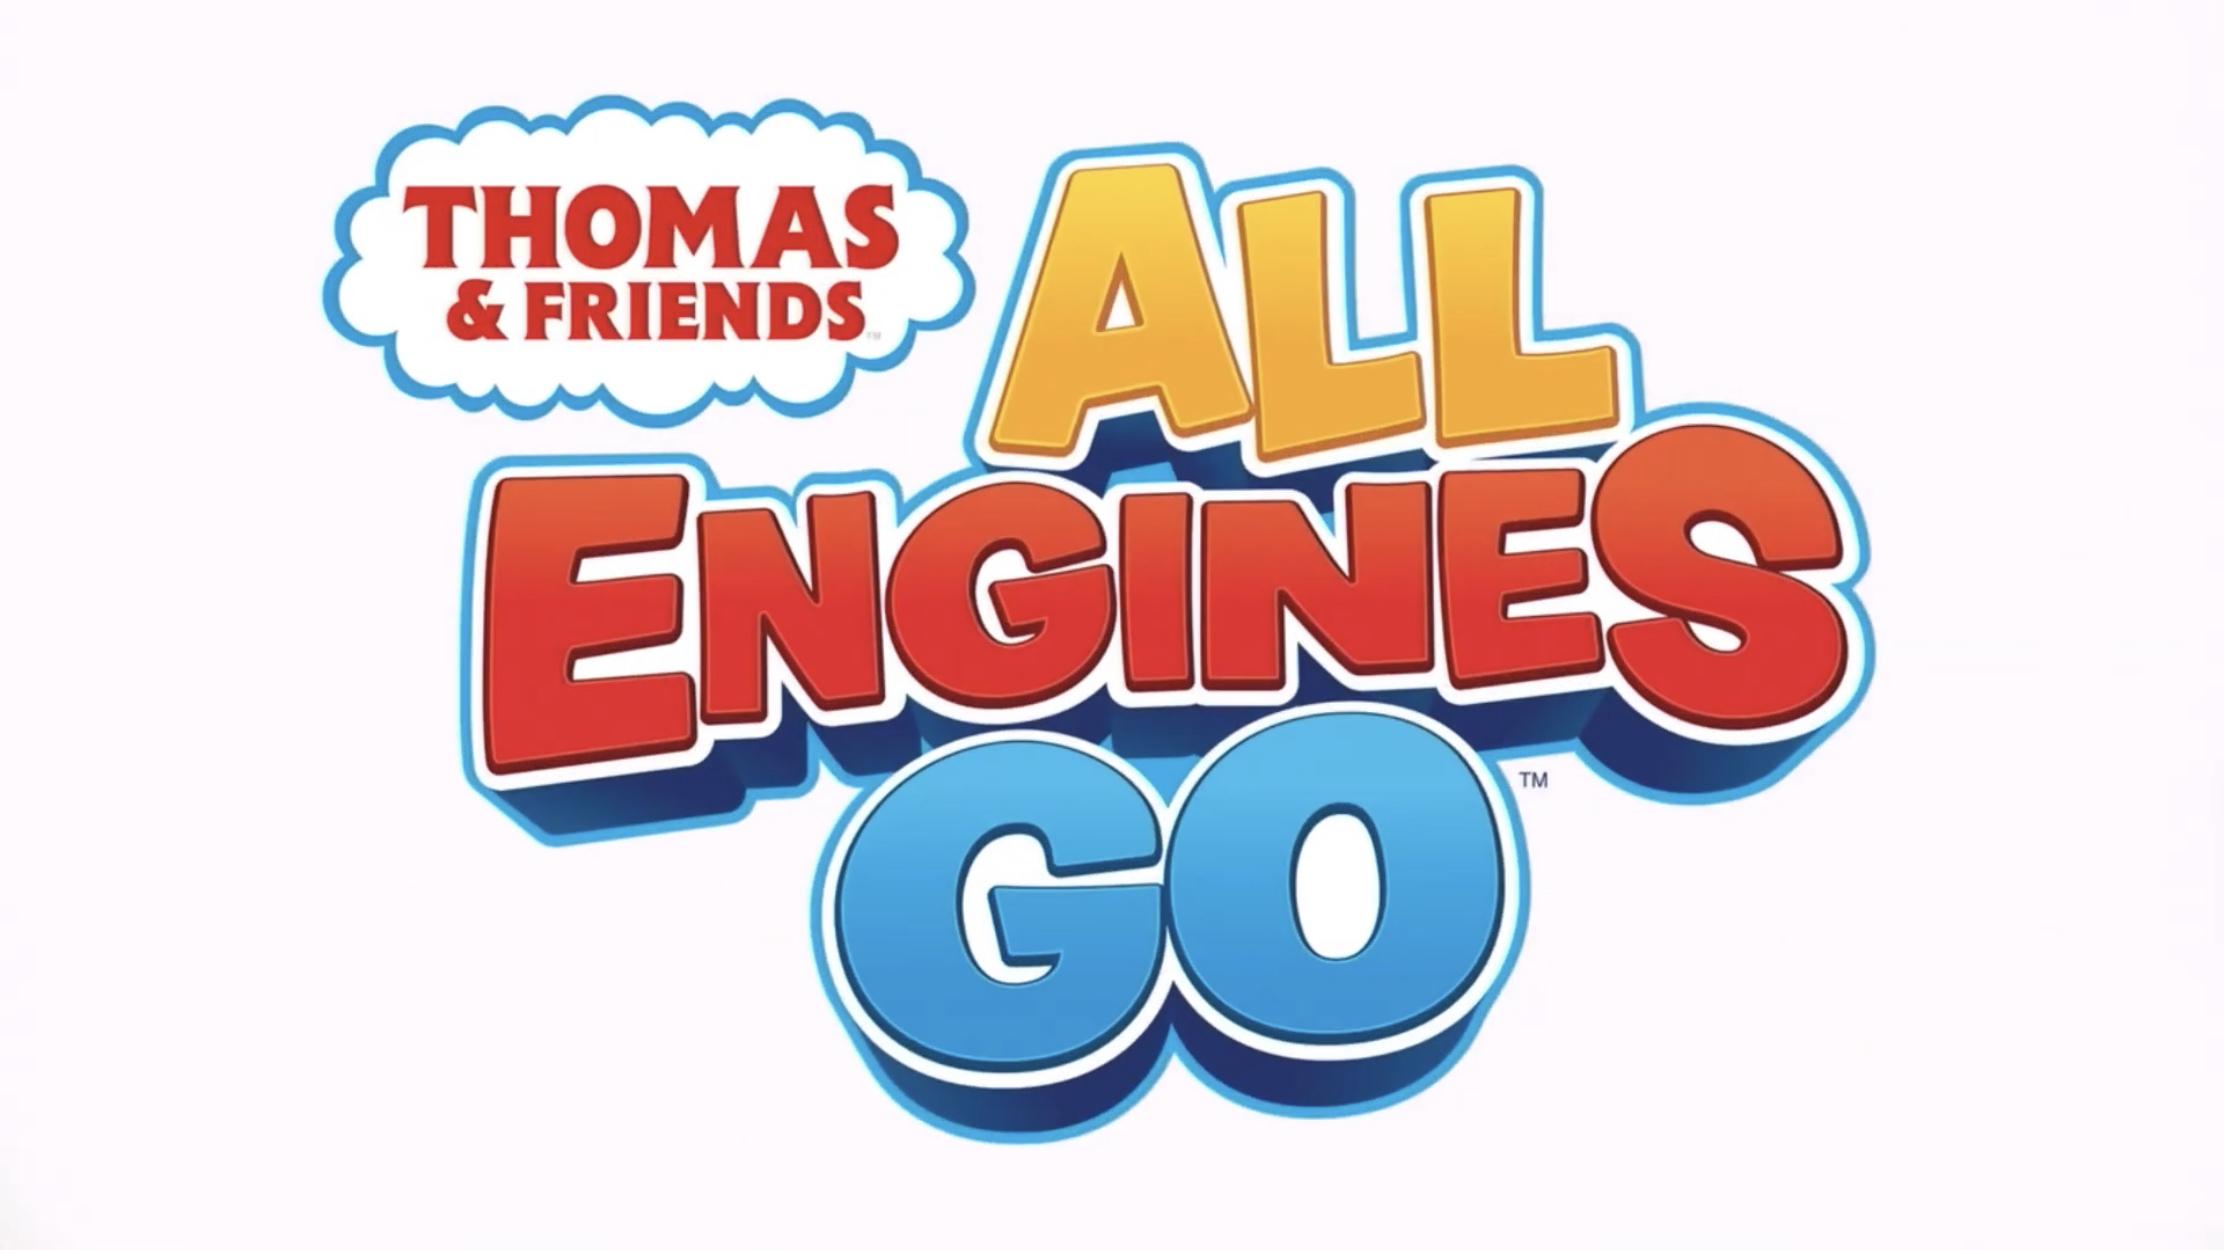 All engines go title.jpeg